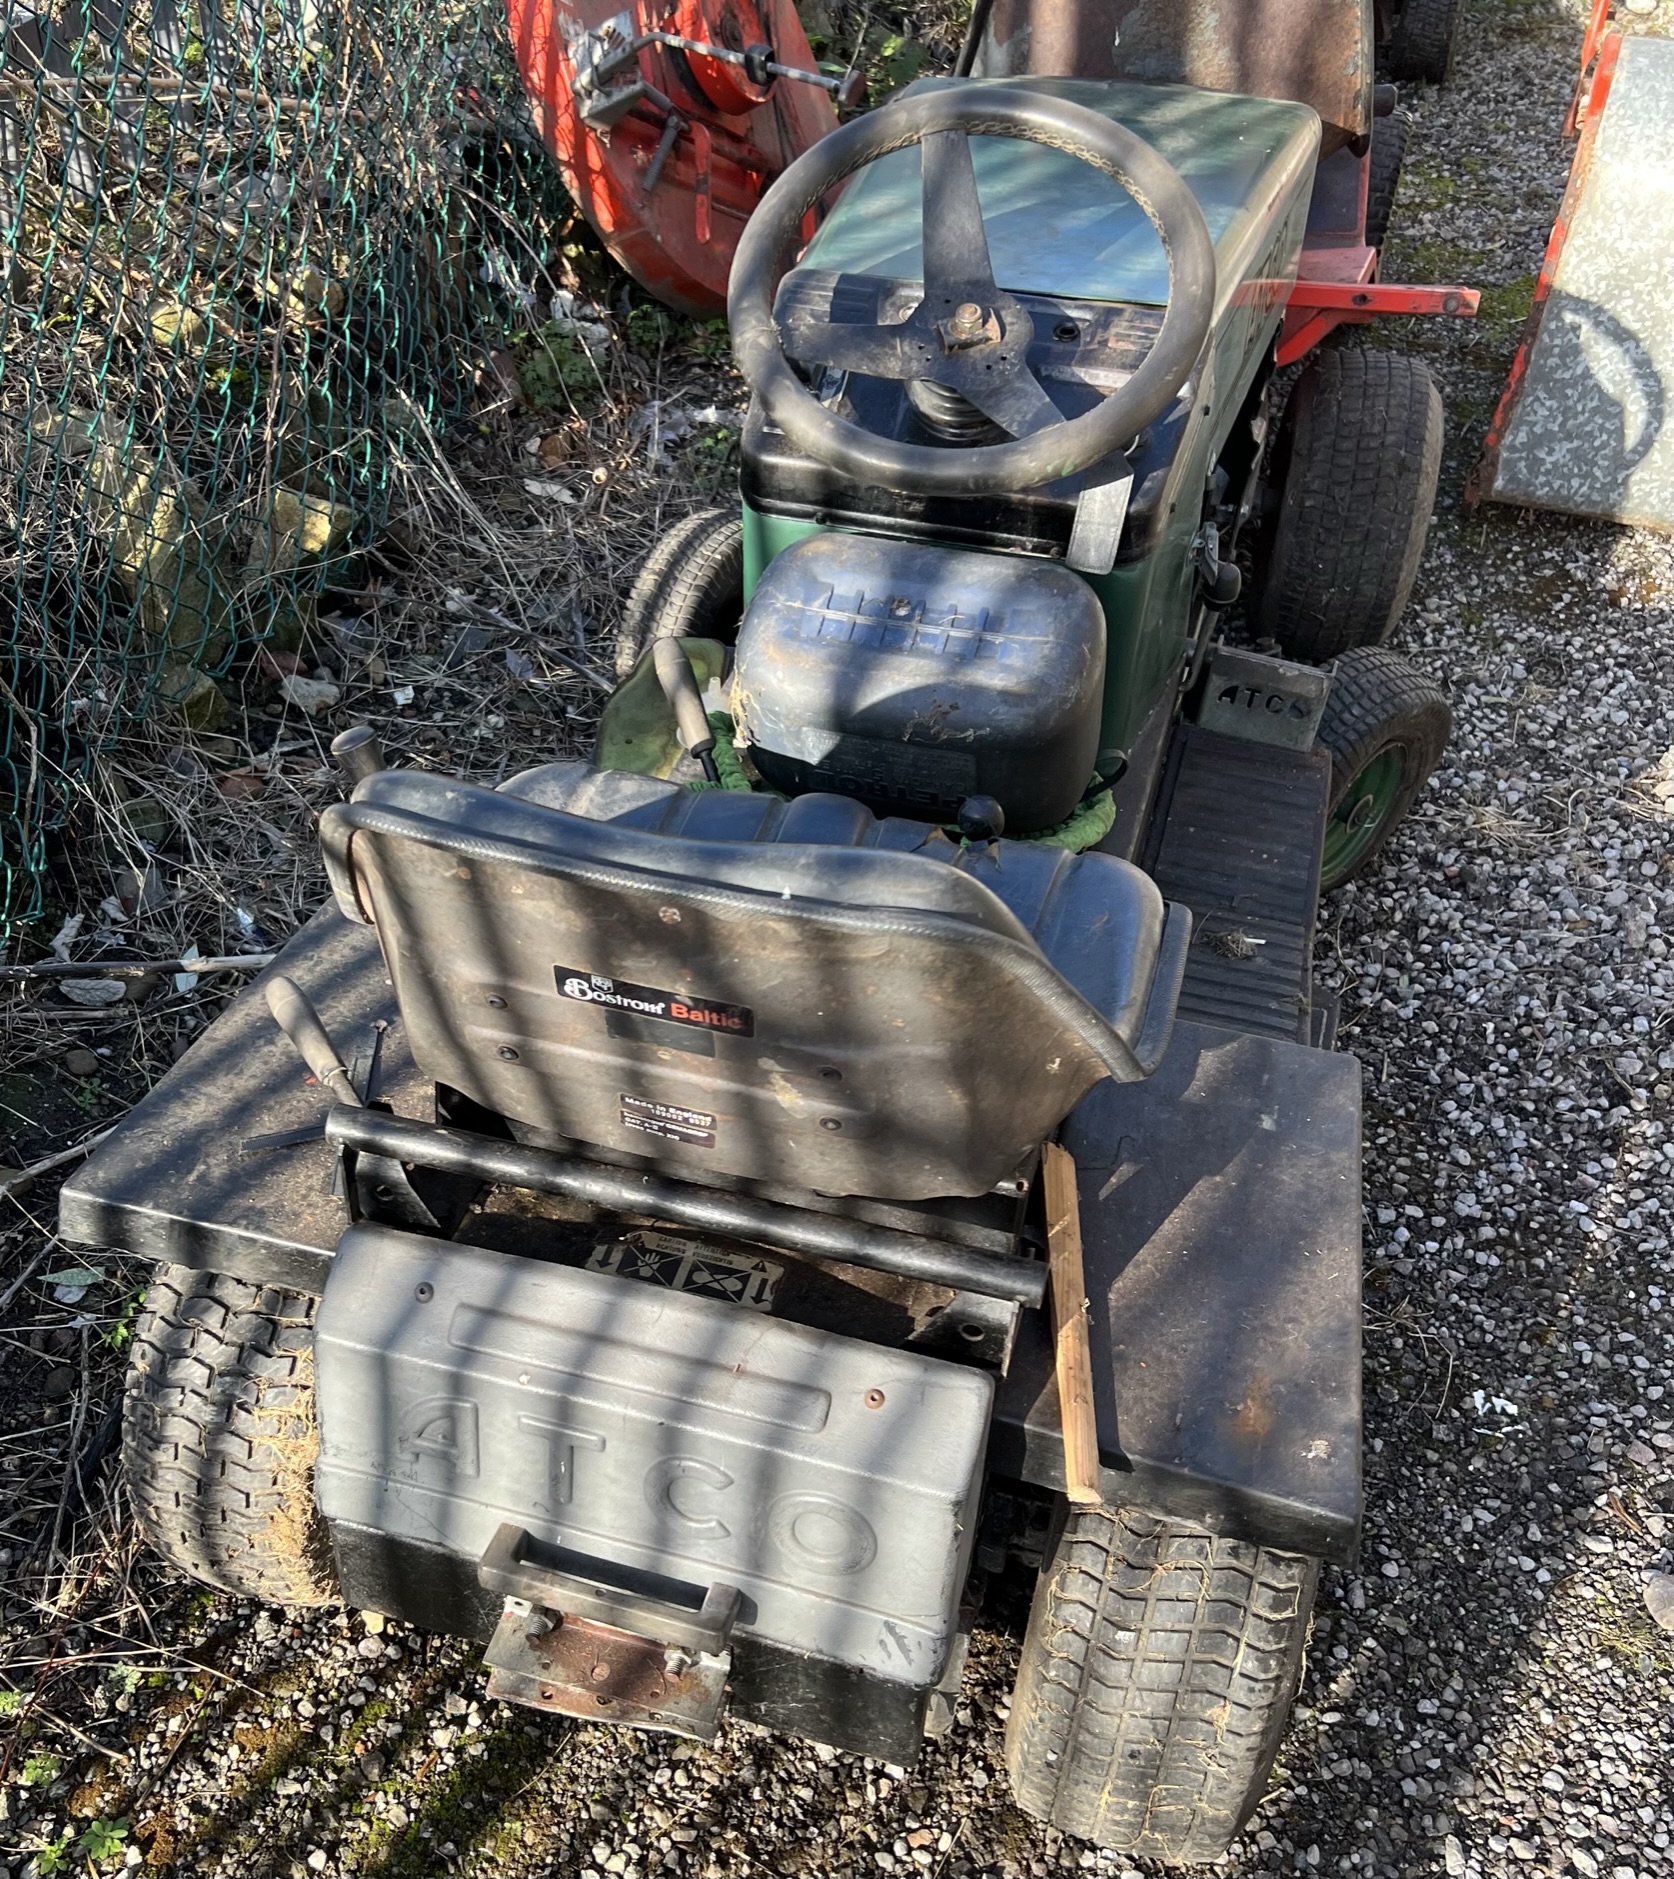 An Atco ride on lawn mower (Sold for spares) - Image 2 of 2